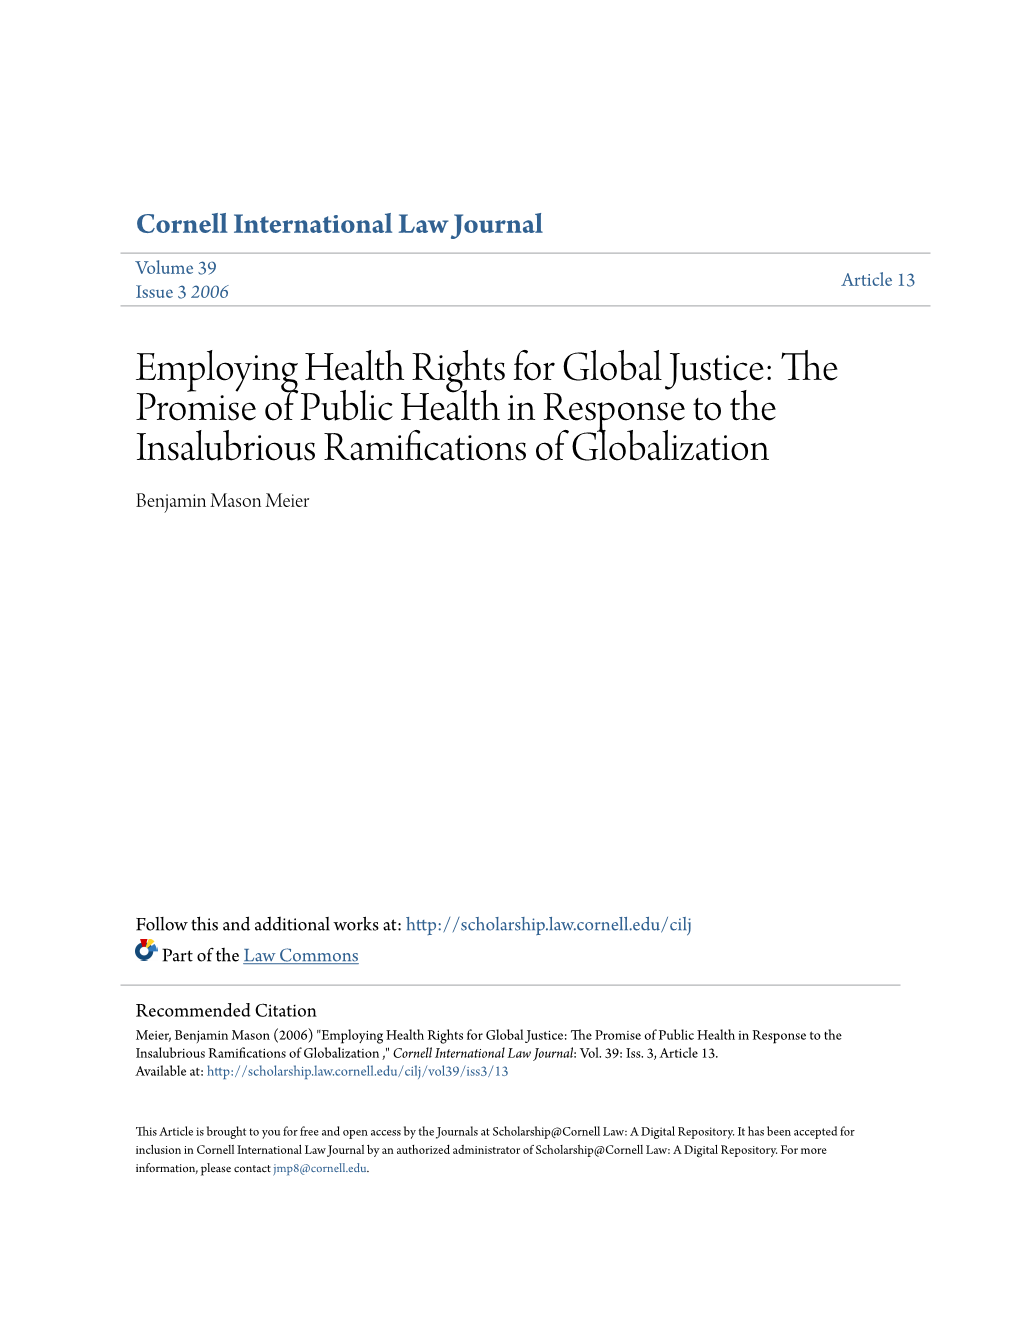 Employing Health Rights for Global Justice: the Promise of Public Health in Response to the Insalubrious Ramifications of Globalization Benjamin Mason Meier